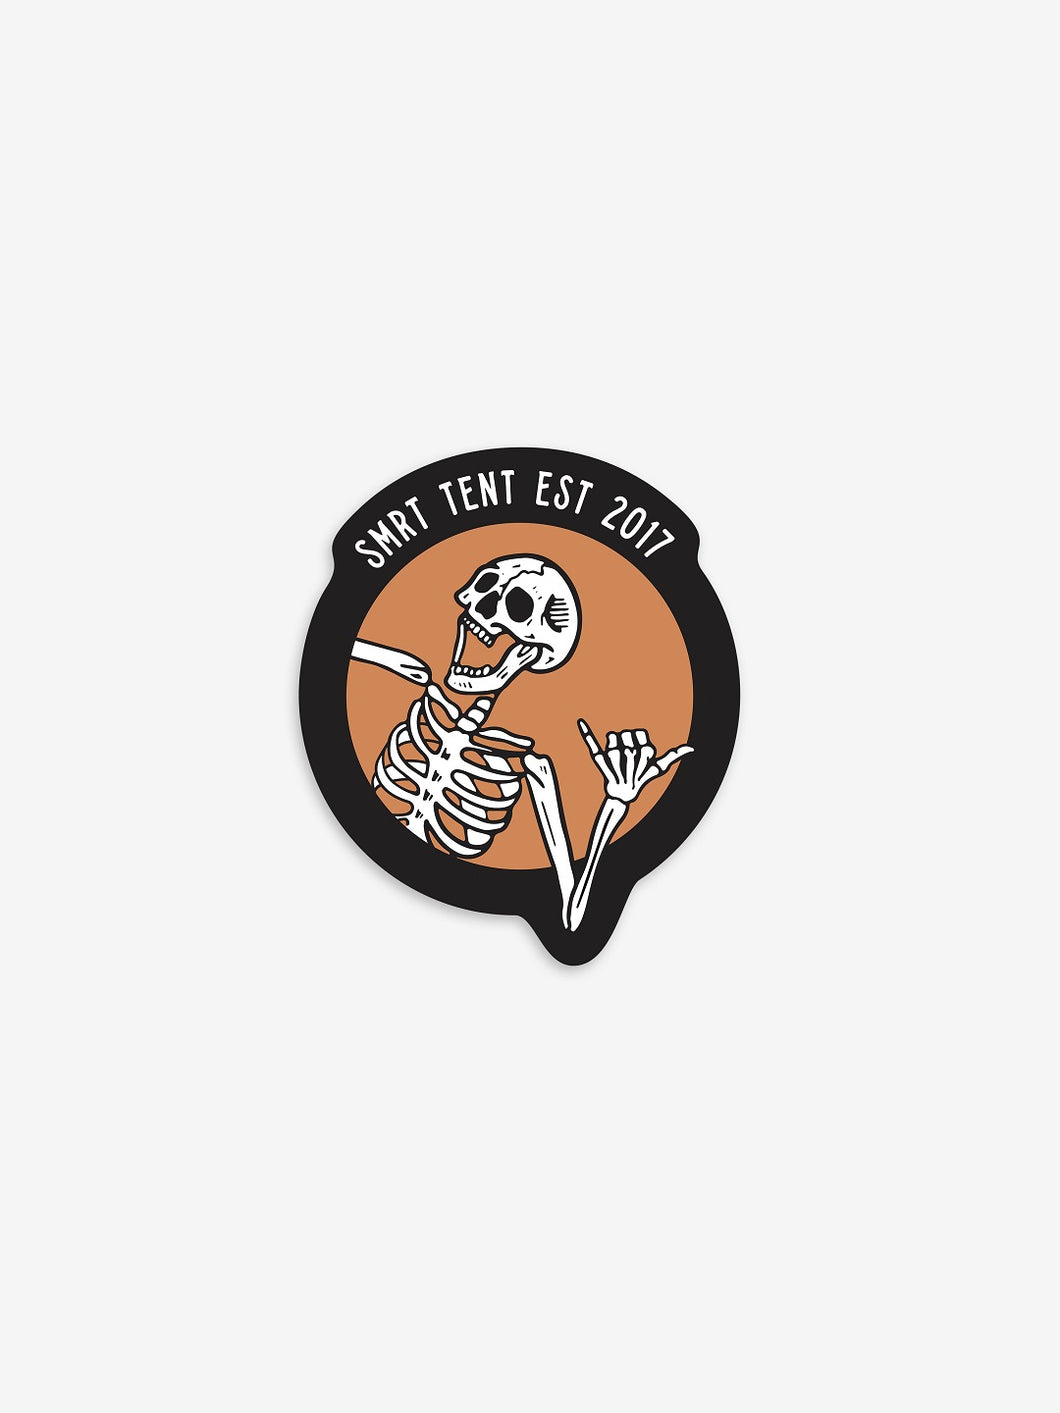 Pictured is a laughing white skeleton in-frame from the ribs up. All the fingers of the left hand are bent except for the thumb and pinky finger. The other hand and arm are out of frame. The backdrop is orange and outlined thickly with another frame in black where it says SMRT Tent Est 2017 in white text. Part of the left arm breaks out of the orange circle frame and overlaps with the black frame. Perfect to put on your car's dash or roof top tent! Available for sale by SMRT Tent in Edmonton, Canada.